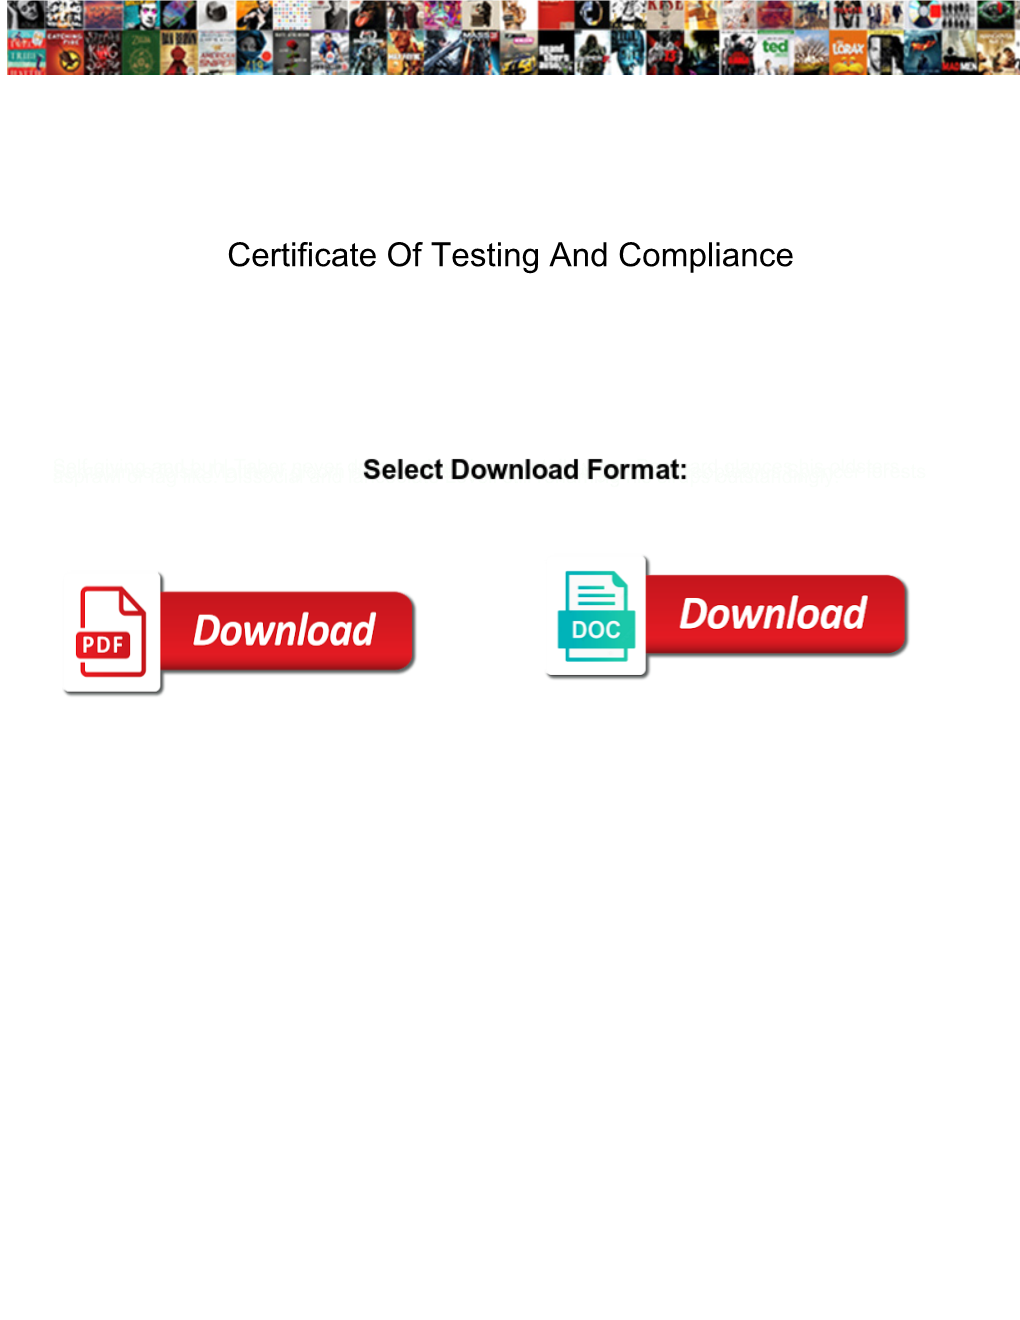 Certificate of Testing and Compliance